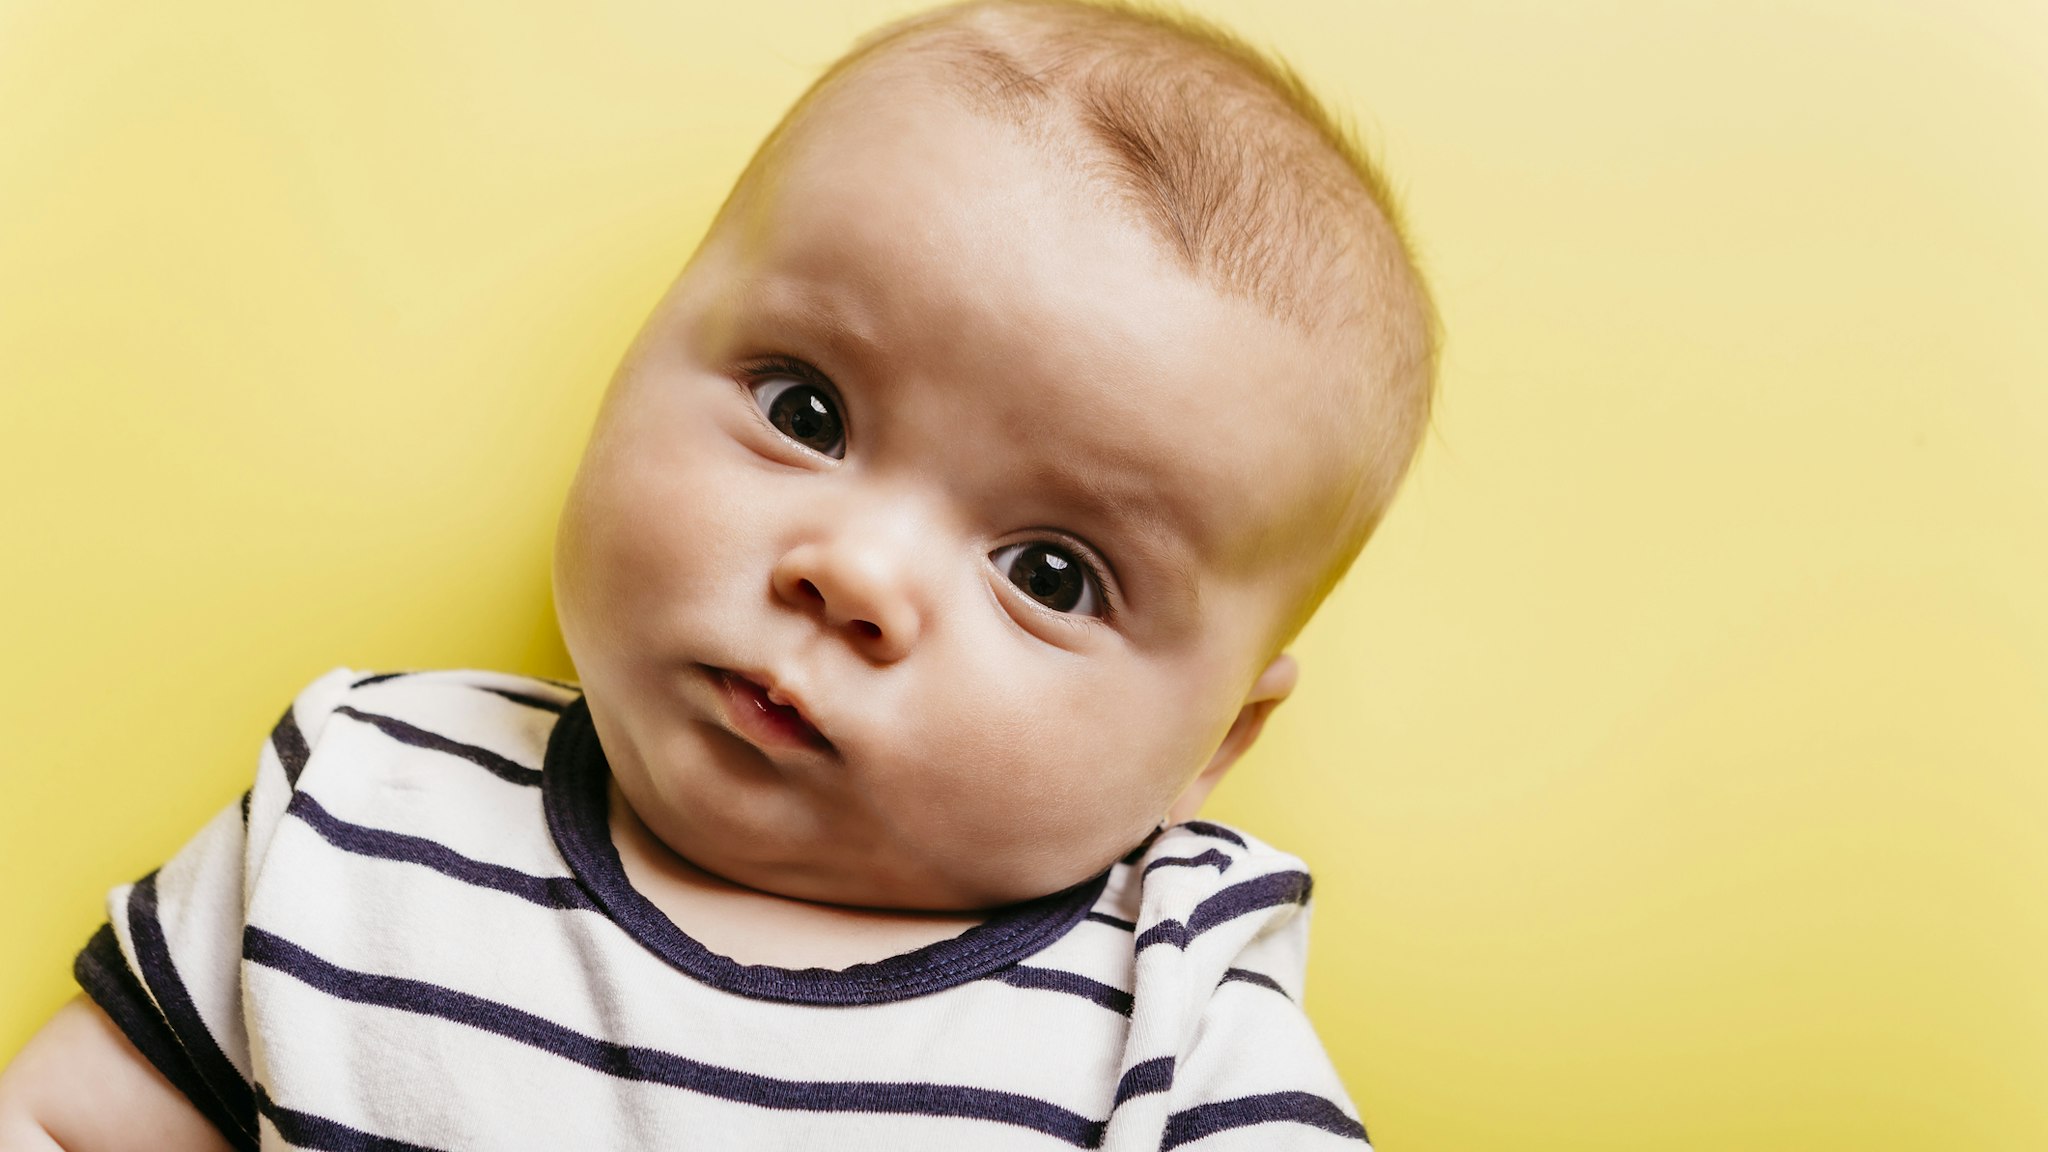 Portrait of sceptical baby girl in front of yellow background - stock photo